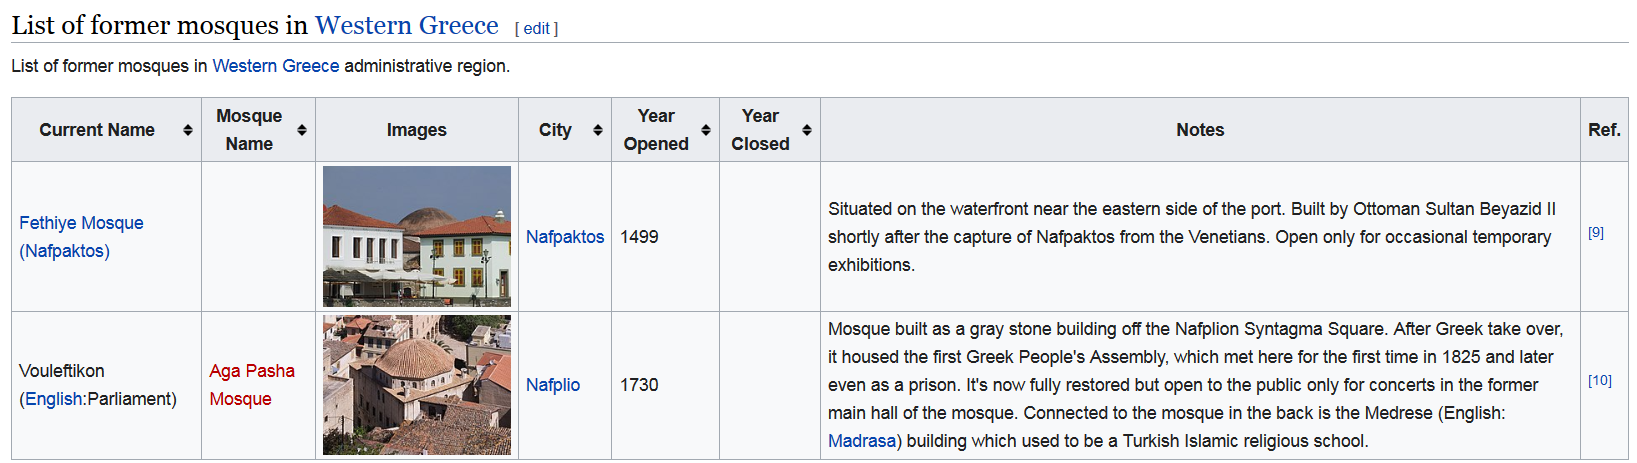 Screenshot_2022-04-06 List of former mosques in Greece - Wikipedia(2).png